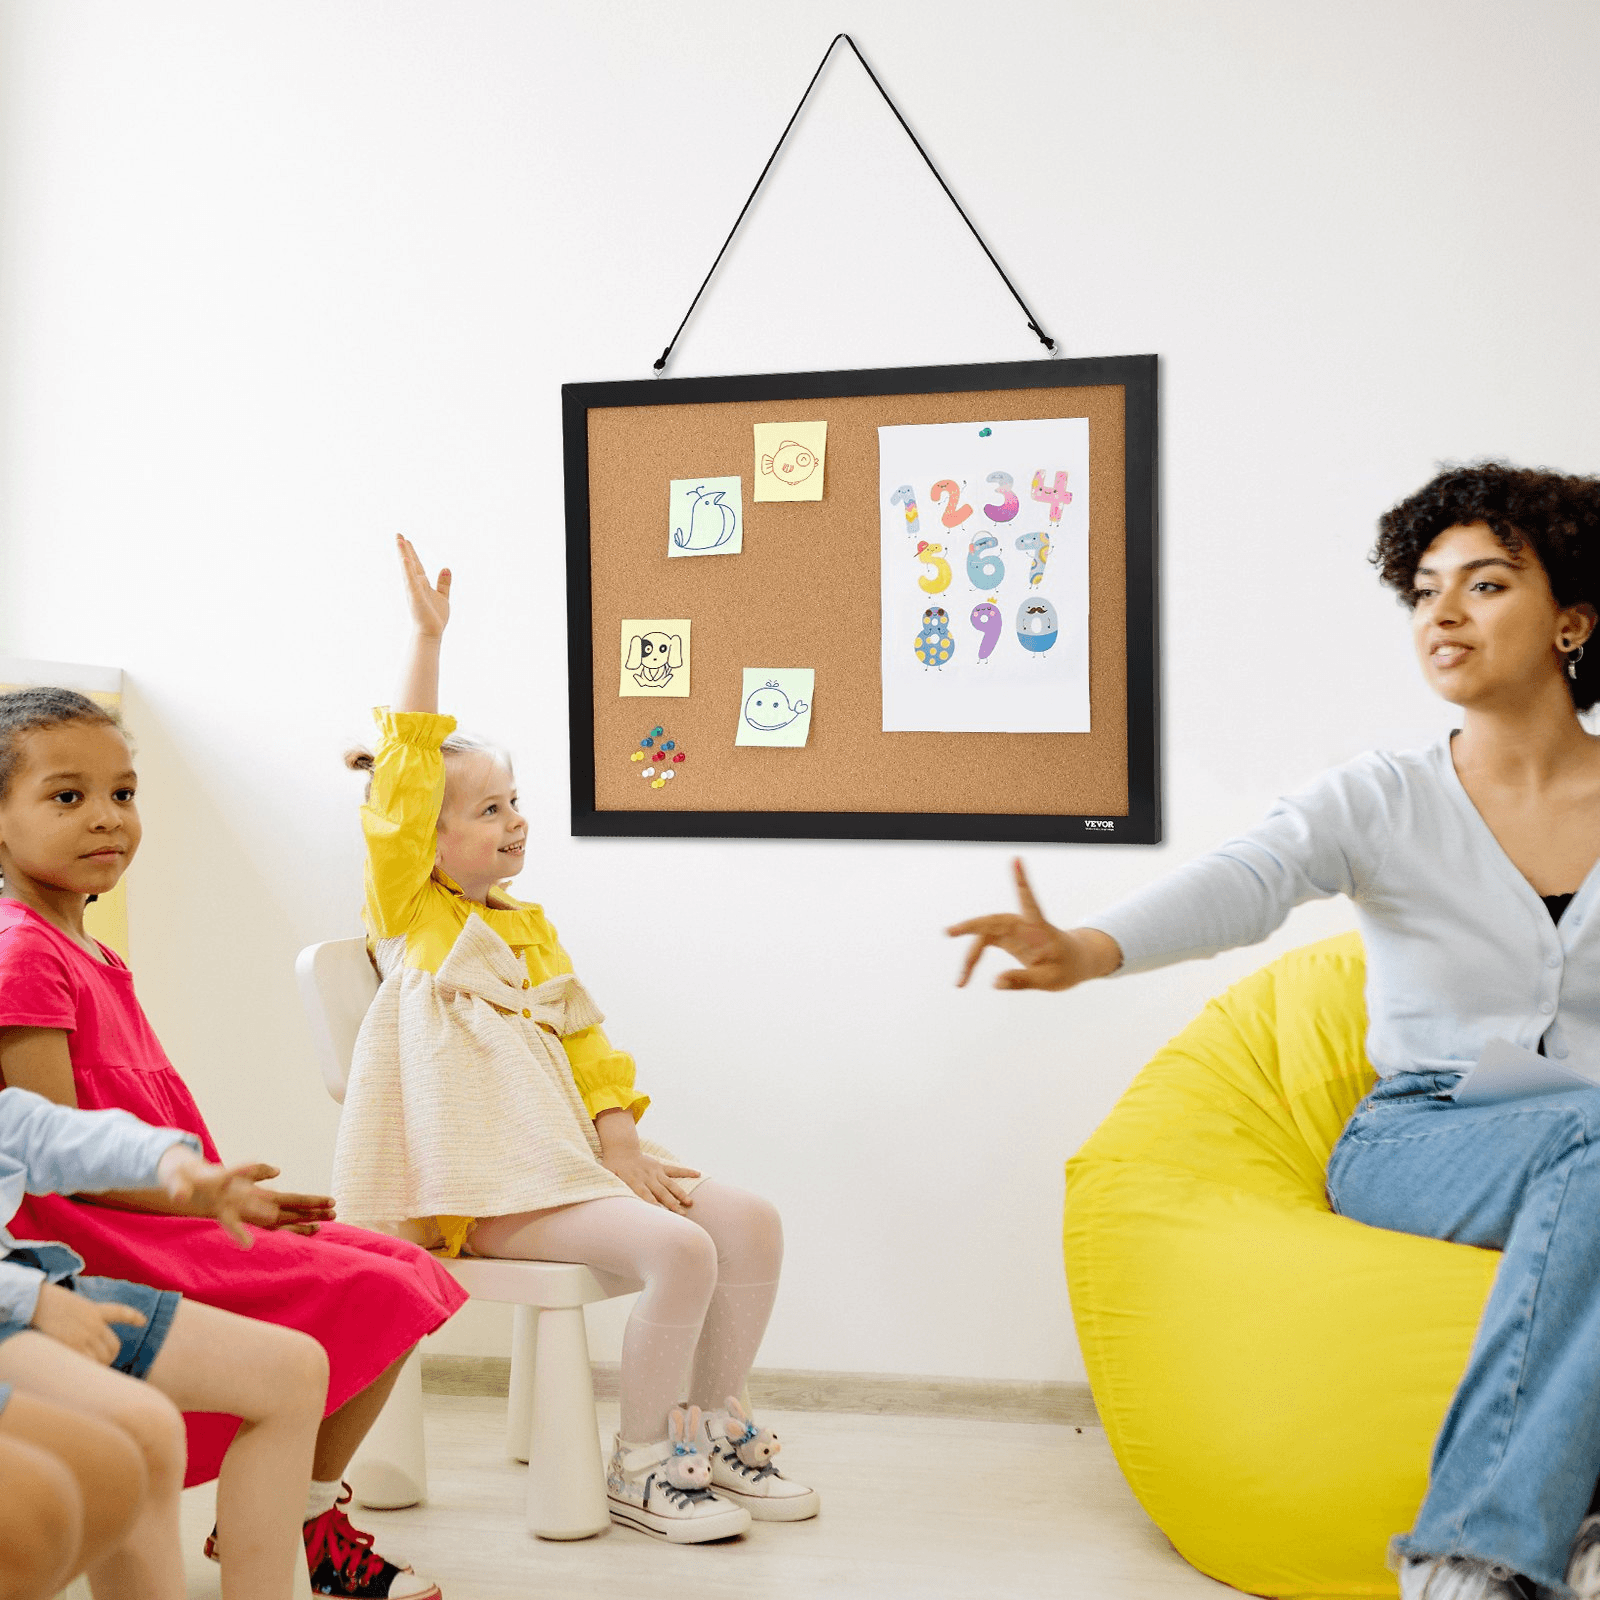 VEVOR Cork Board, 24 x 18 inches, Double-sided Bulletin Board with MDF Sticker Frame, Vision Board Includes 10 Pushpins, for Display and Decoration in Office Home and School - Loomini